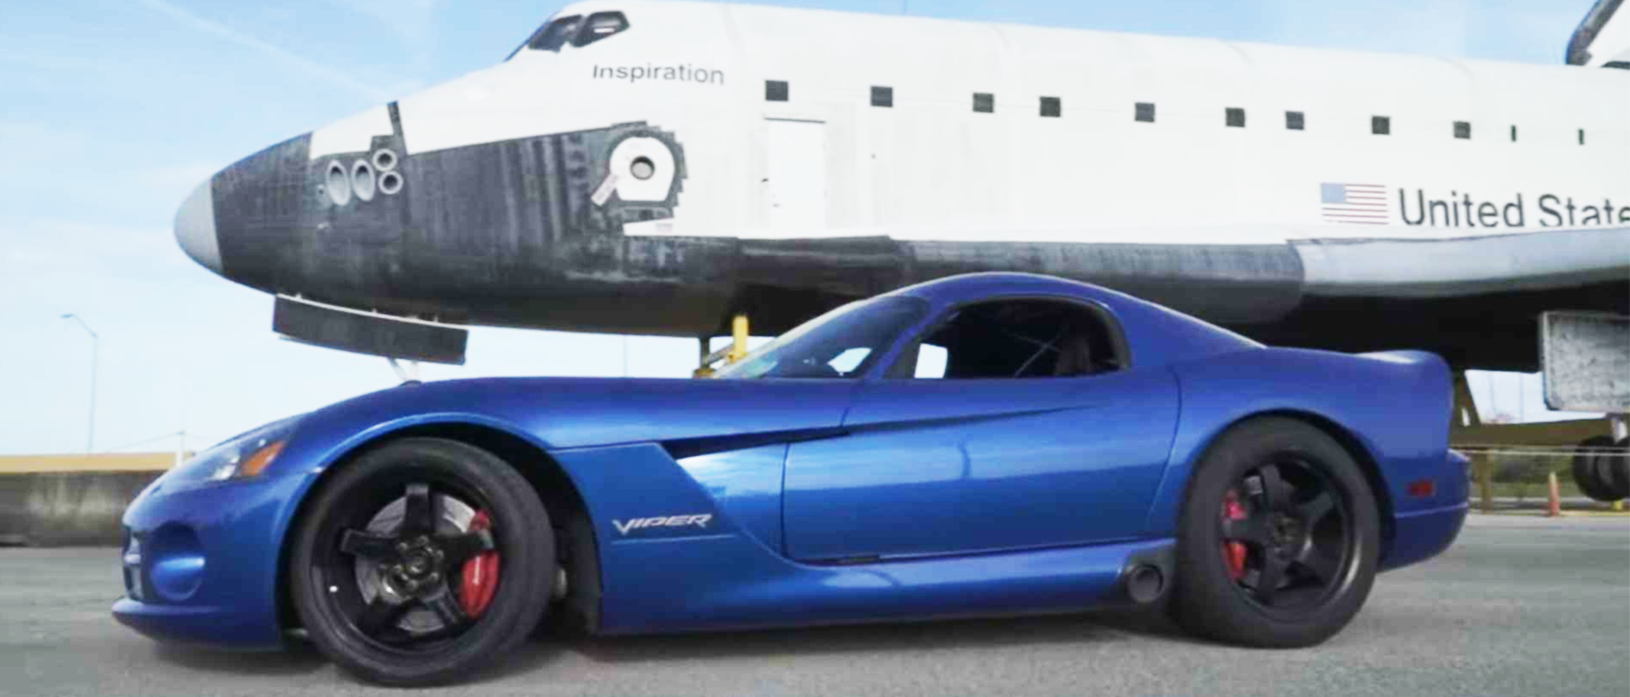 2006 dodge viper next to an airplane